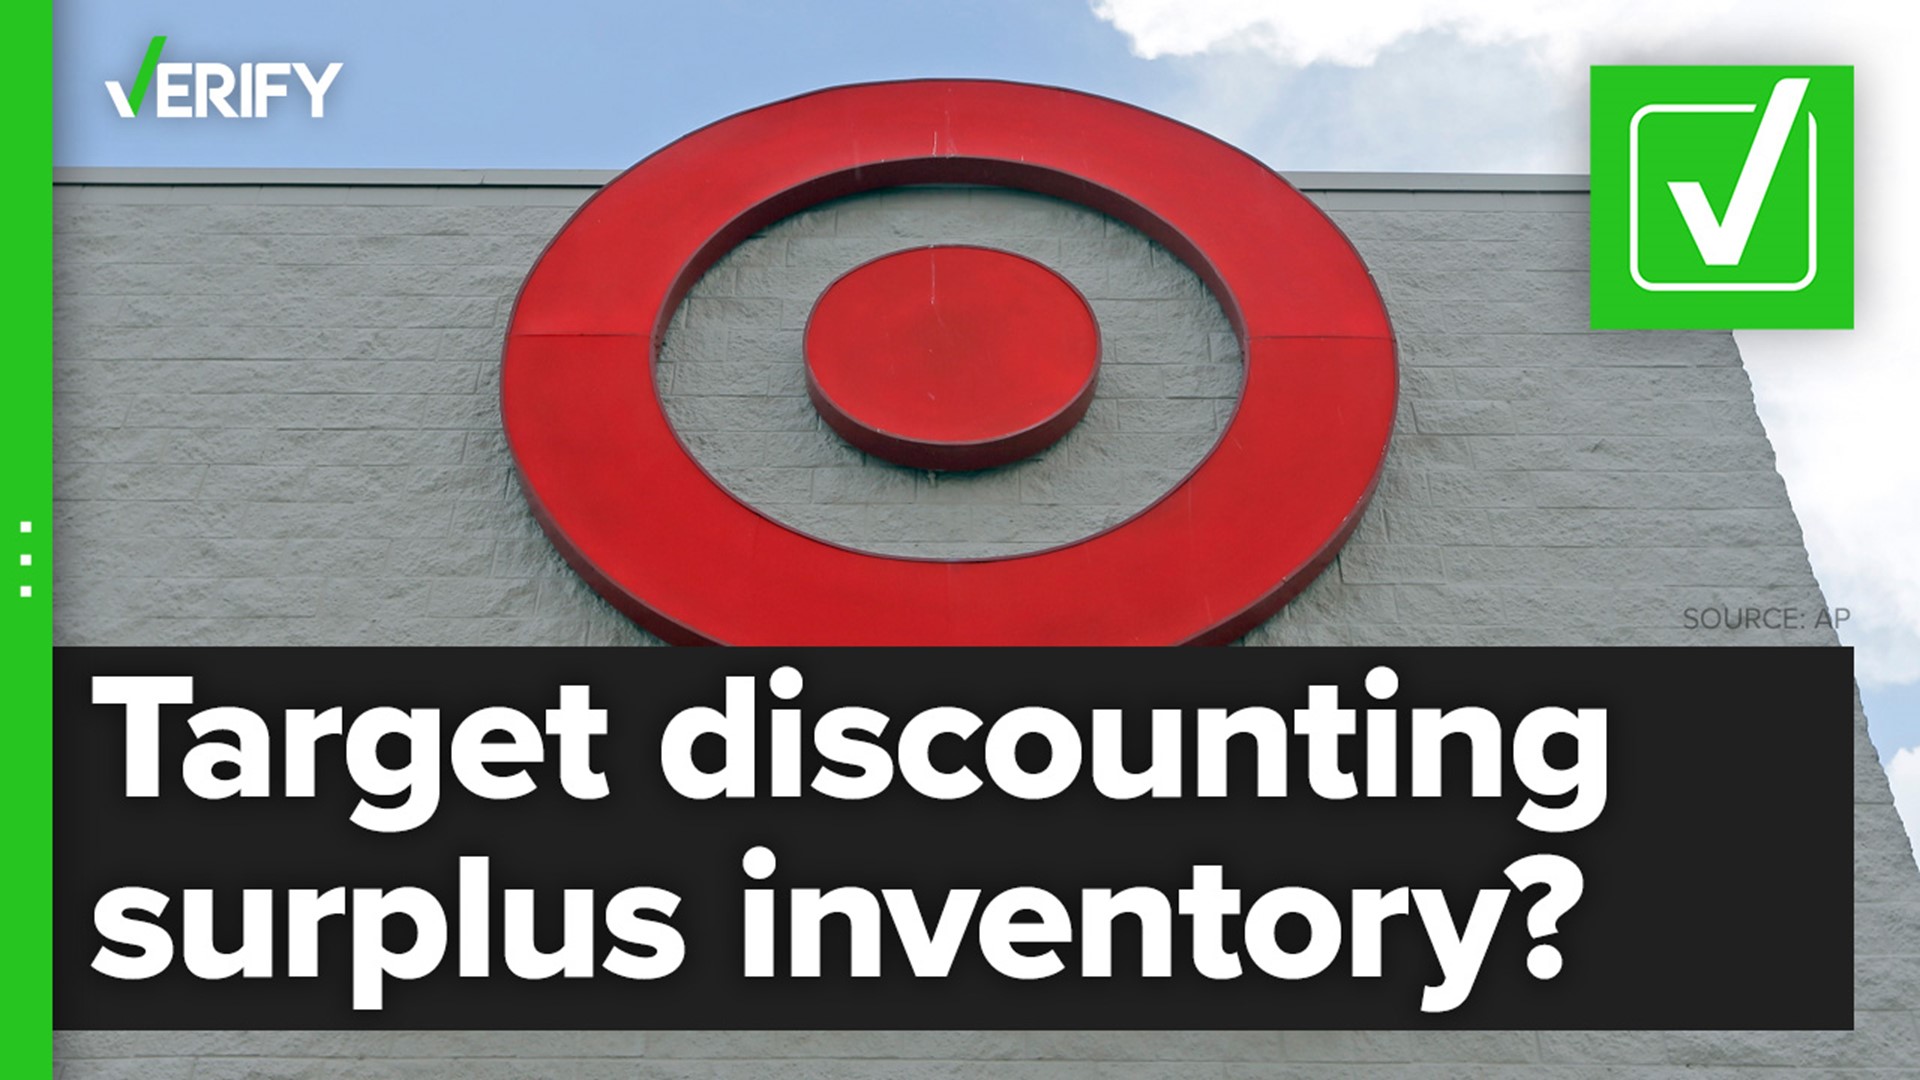 Target told investors in May 2022 that its shelves were overstocked in the wrong areas during the first half of the year, leading to markdowns.